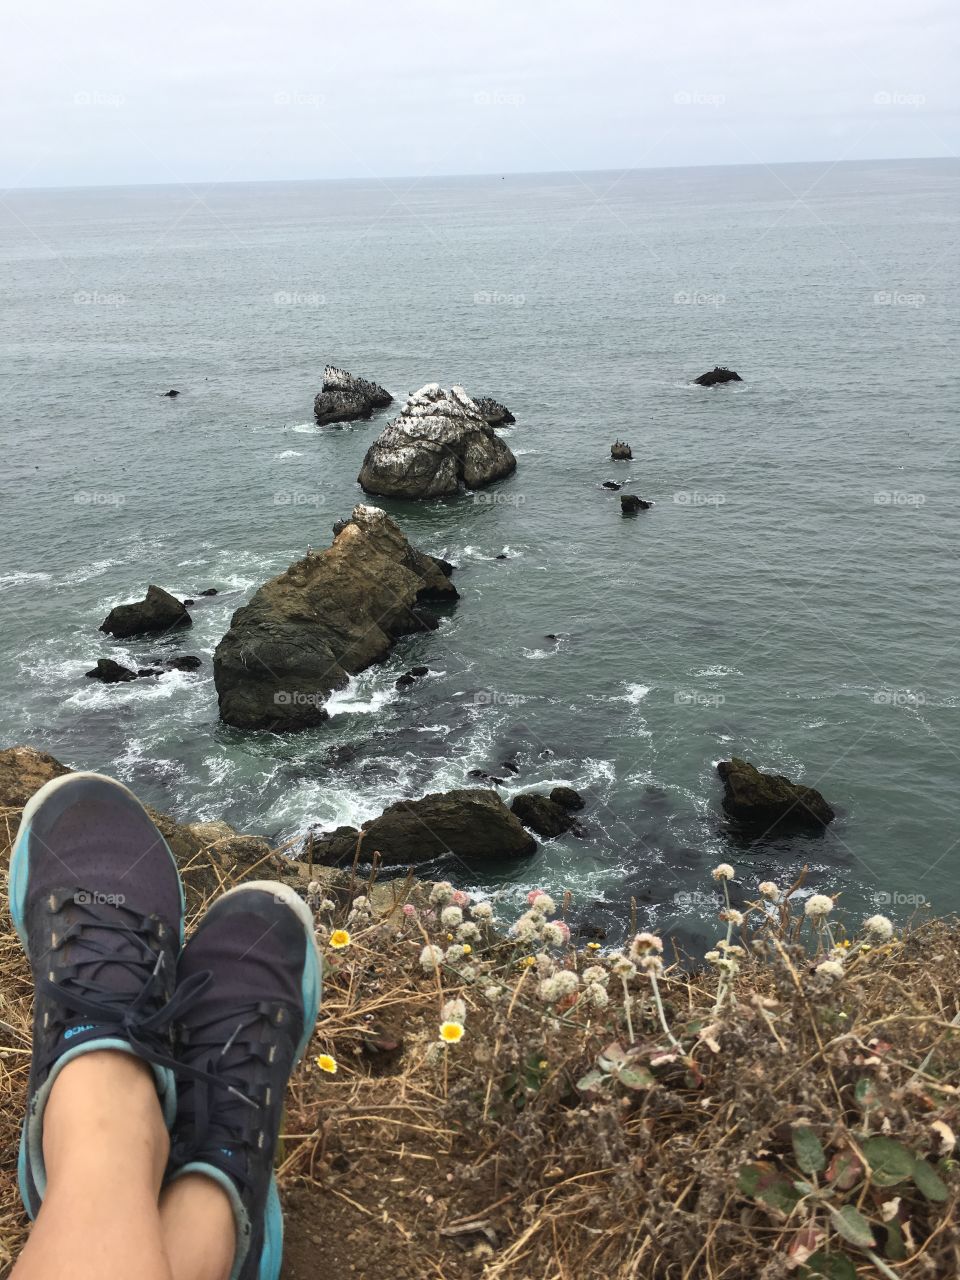 Sitting on a cliff by the ocean with shoes in the frame